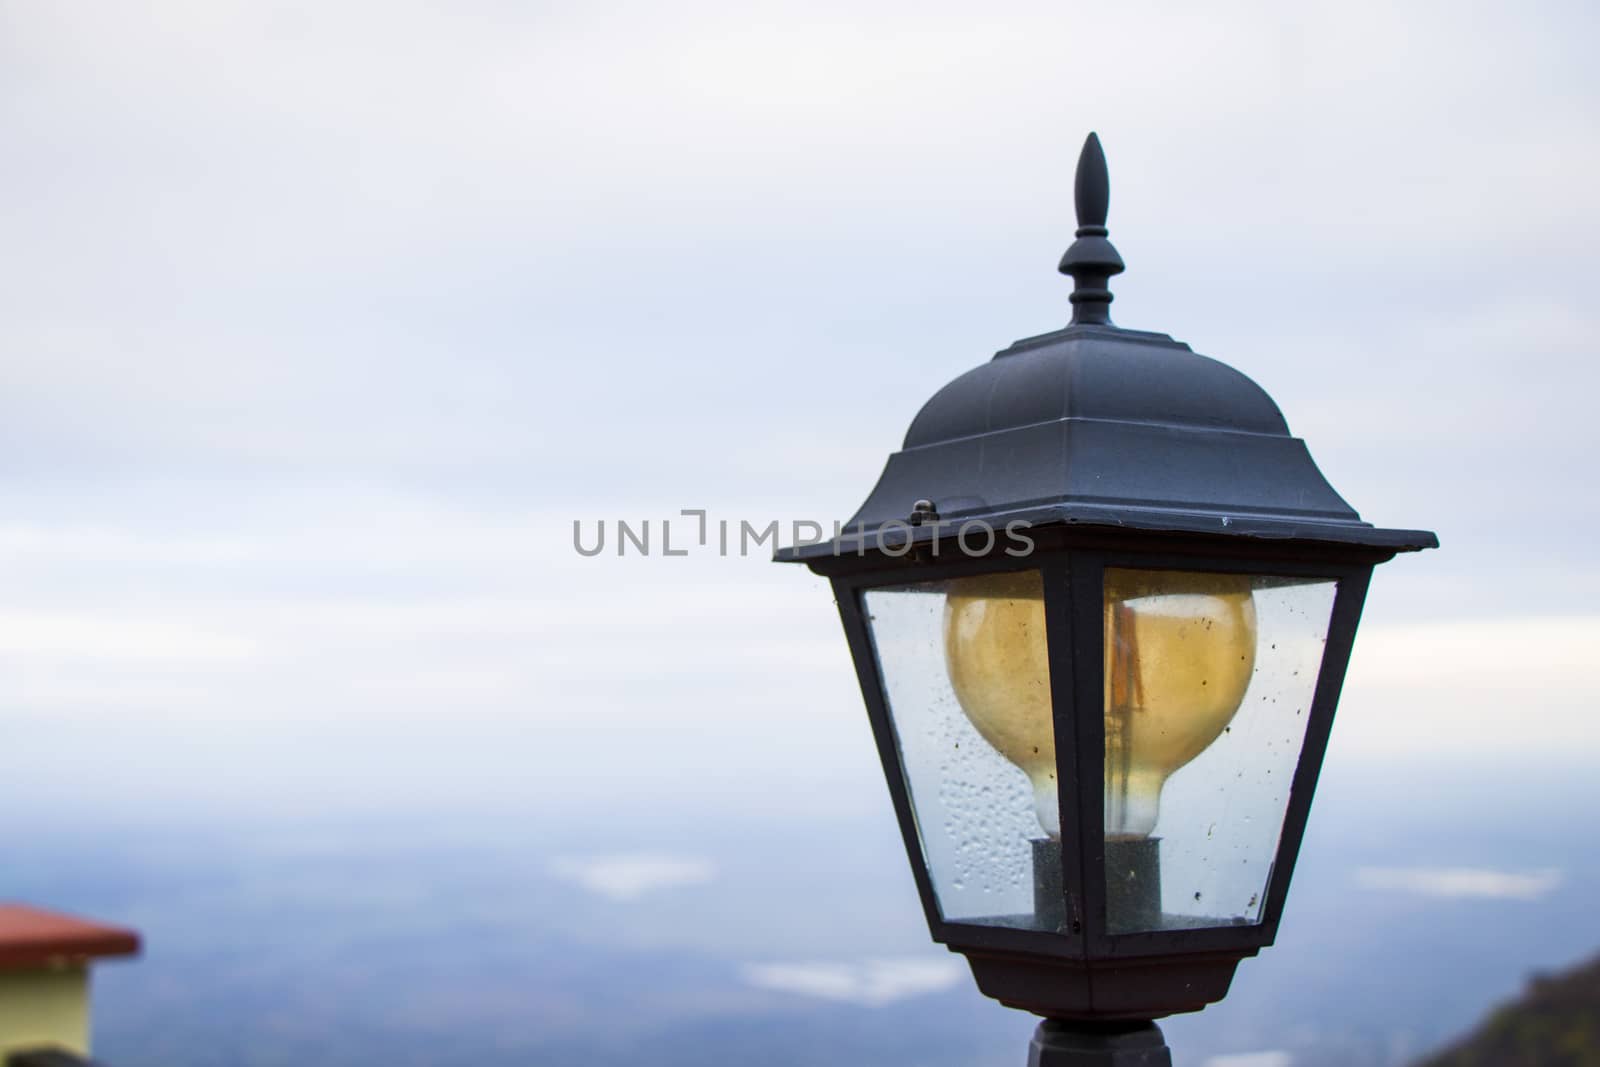 Outdoor lighting, lamp and bulb close-up by Taidundua